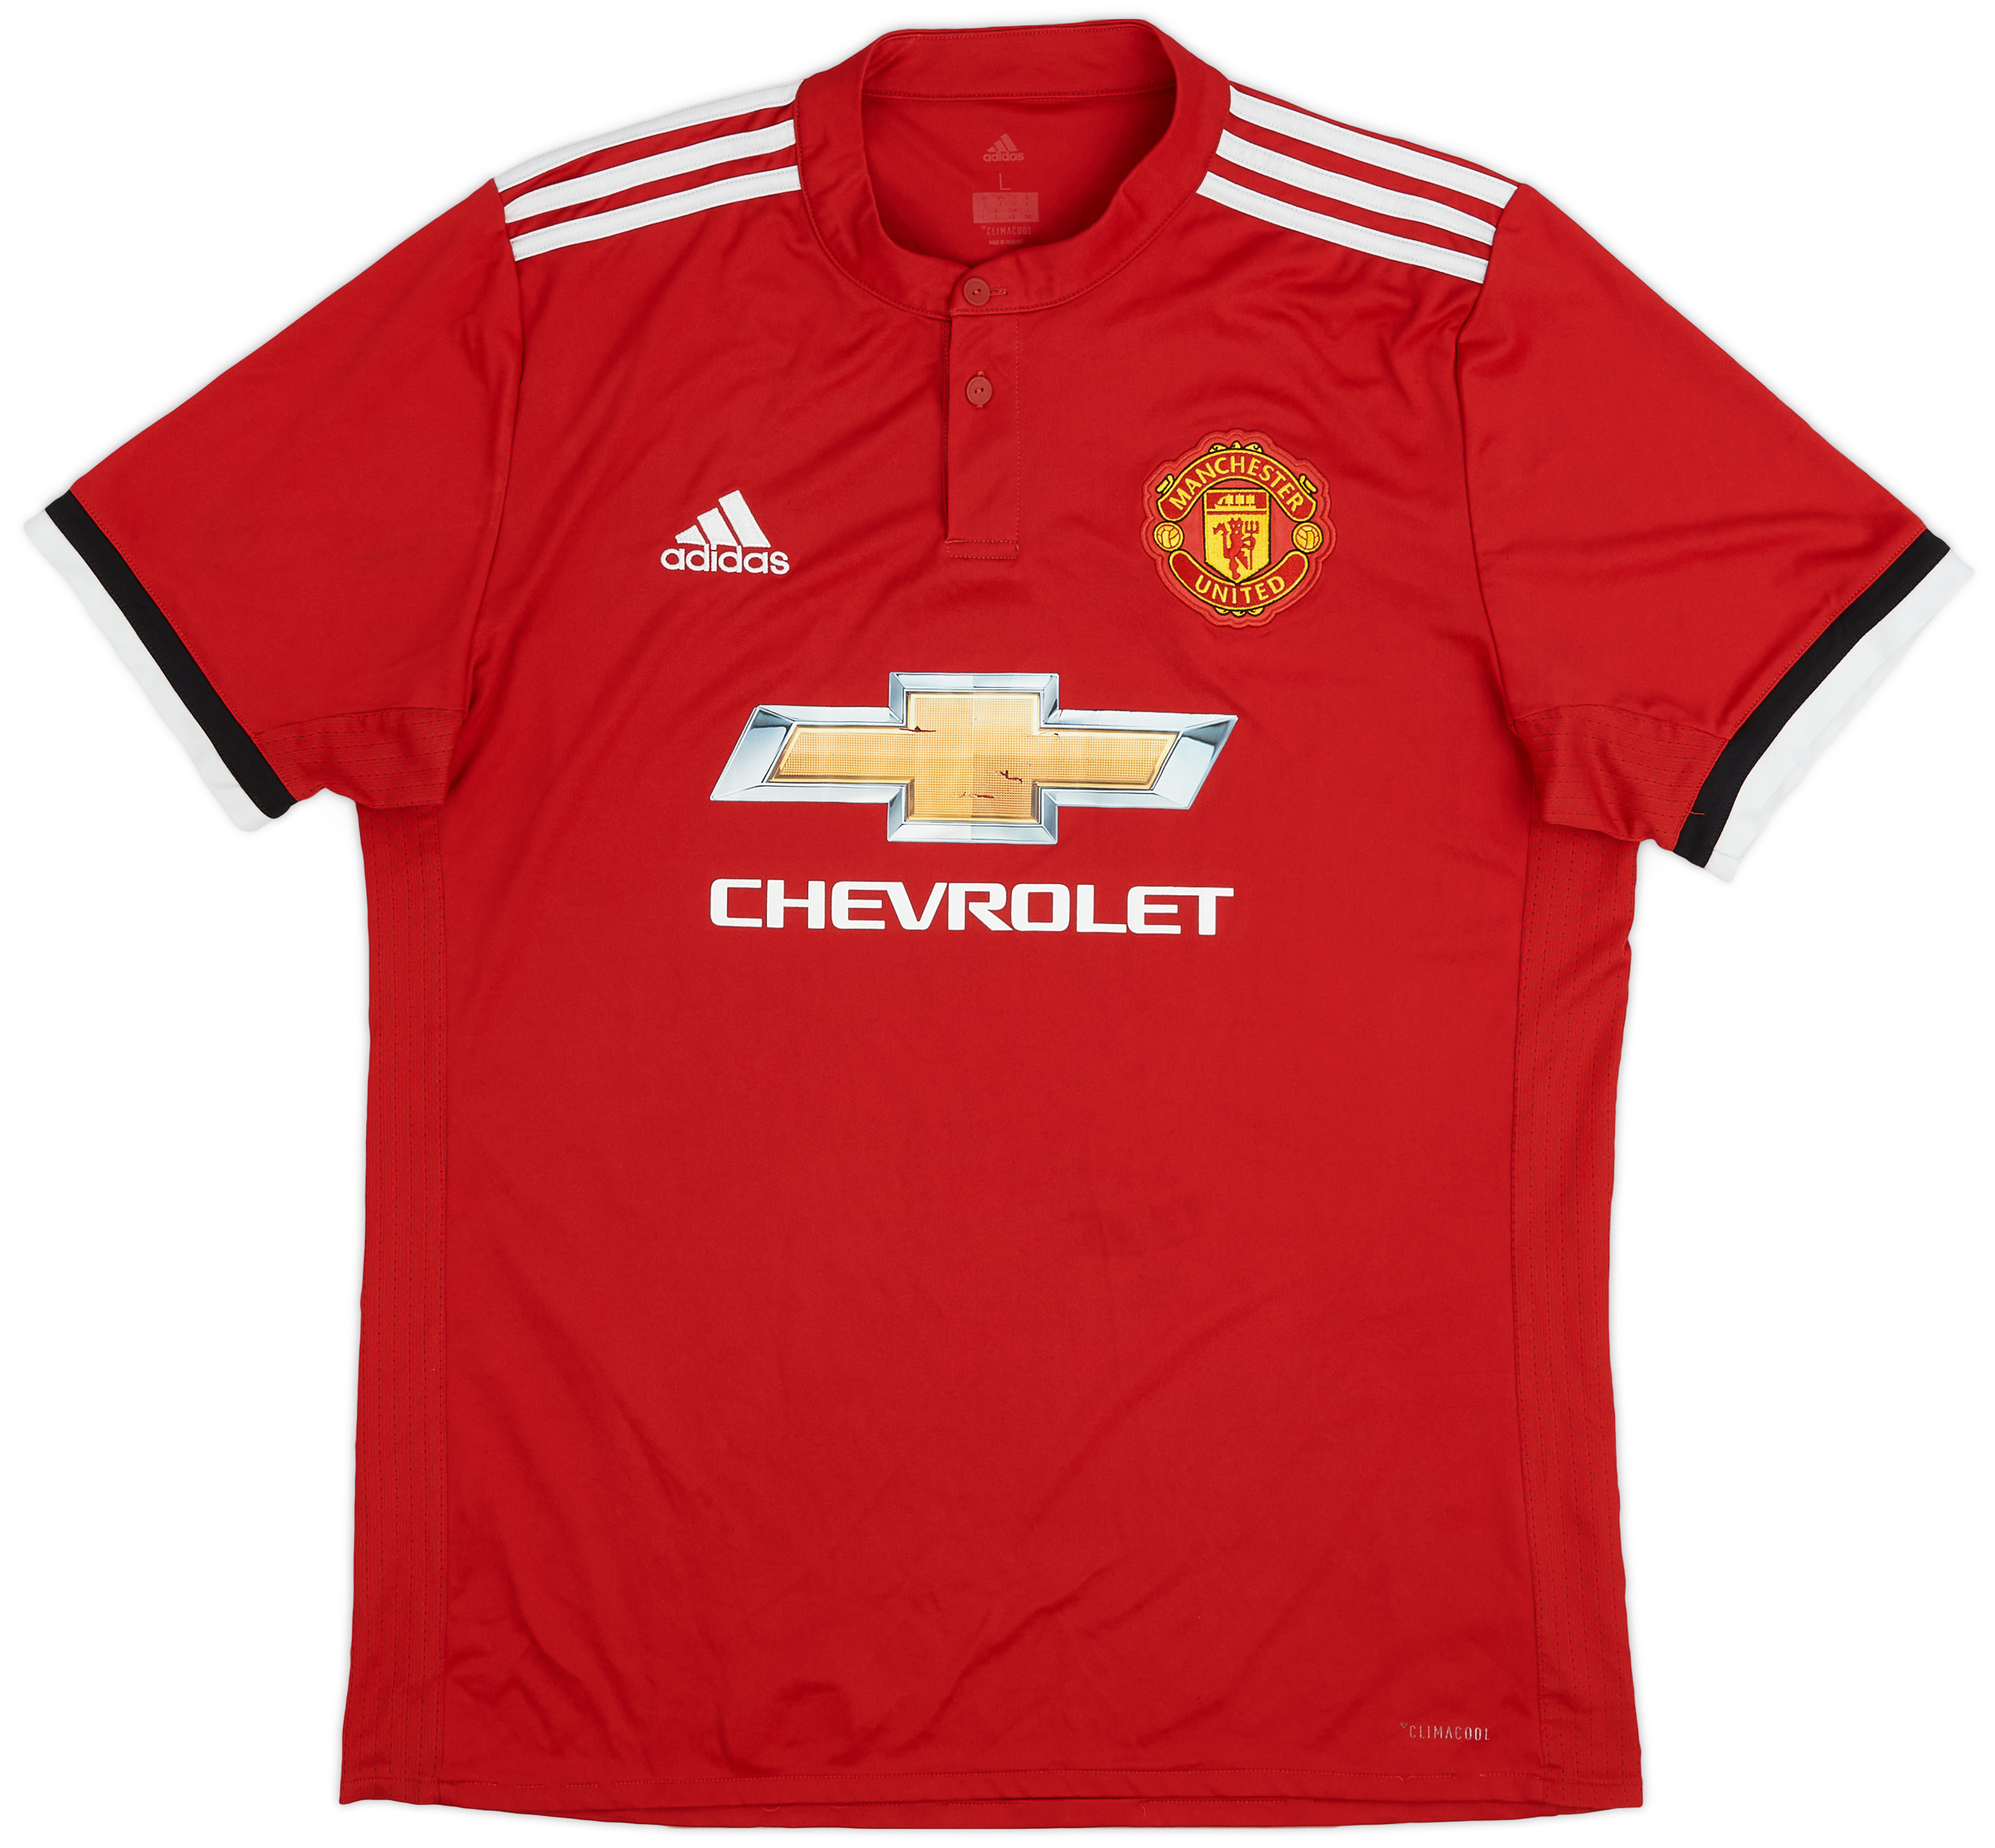 2017-18 Manchester United Home Shirt - 5/10 - ()